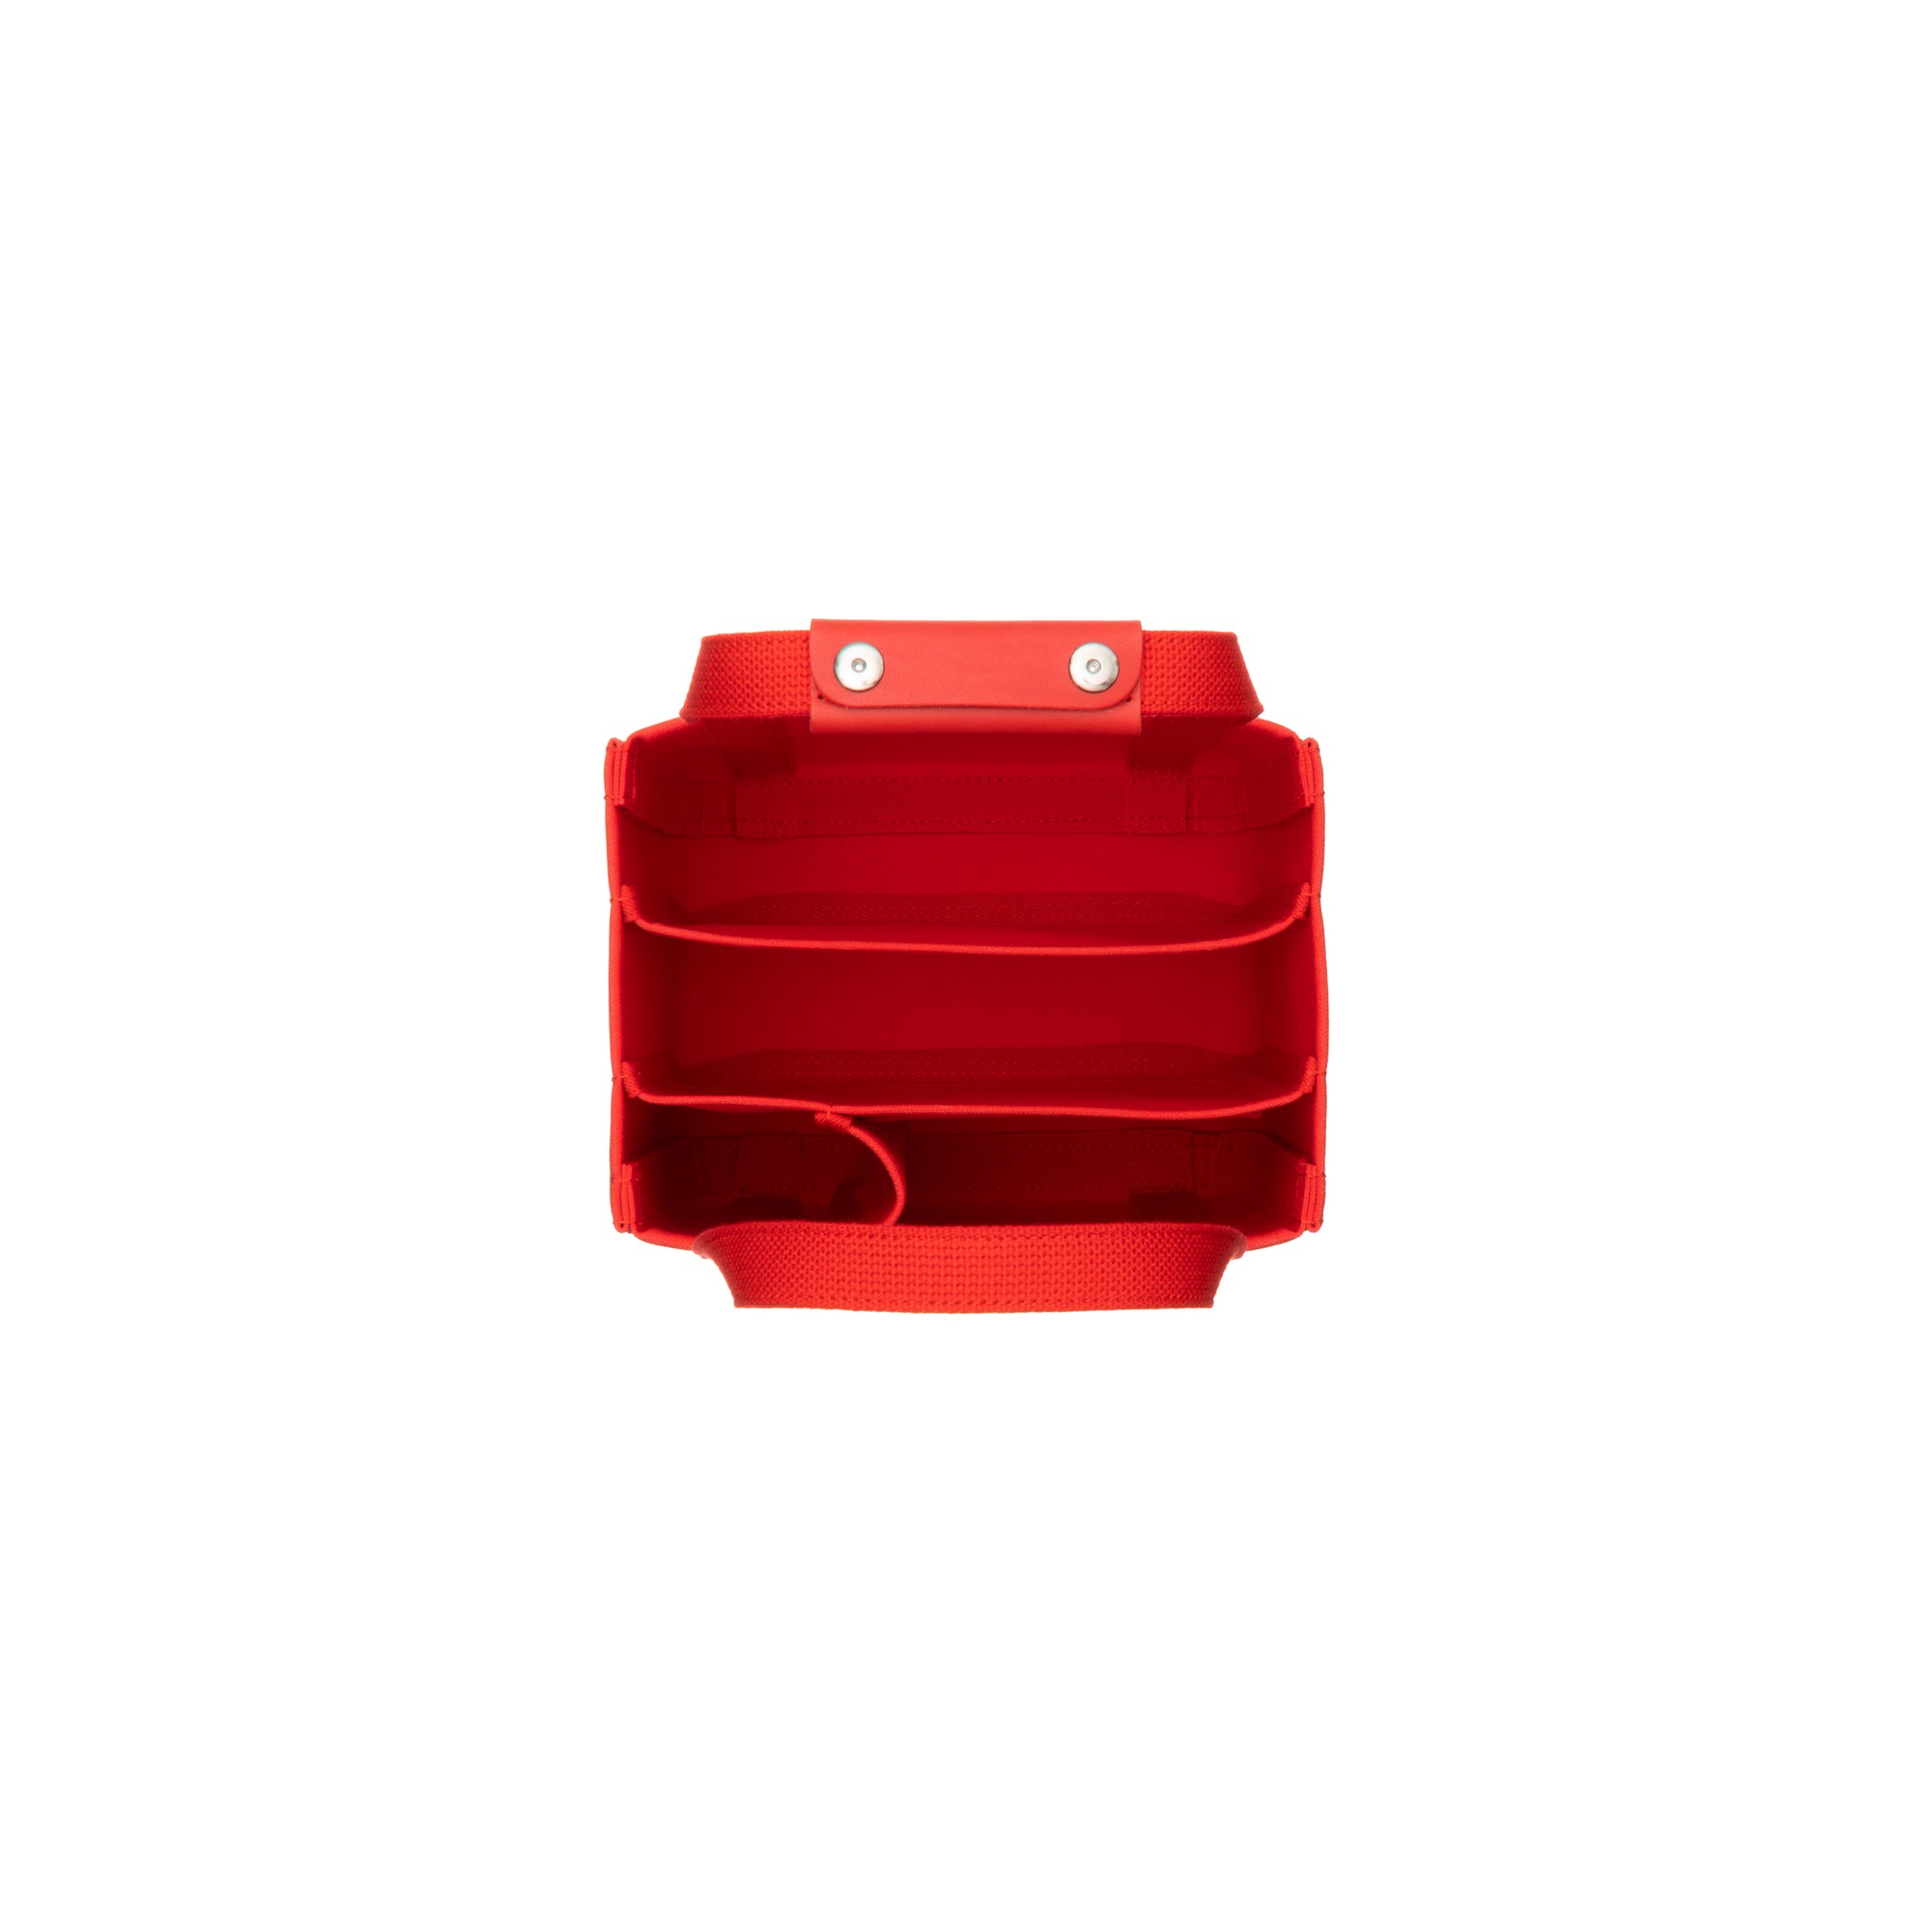 CHACOLI - 07 TOTE W240 X H200 X D180 - (RED) view 3